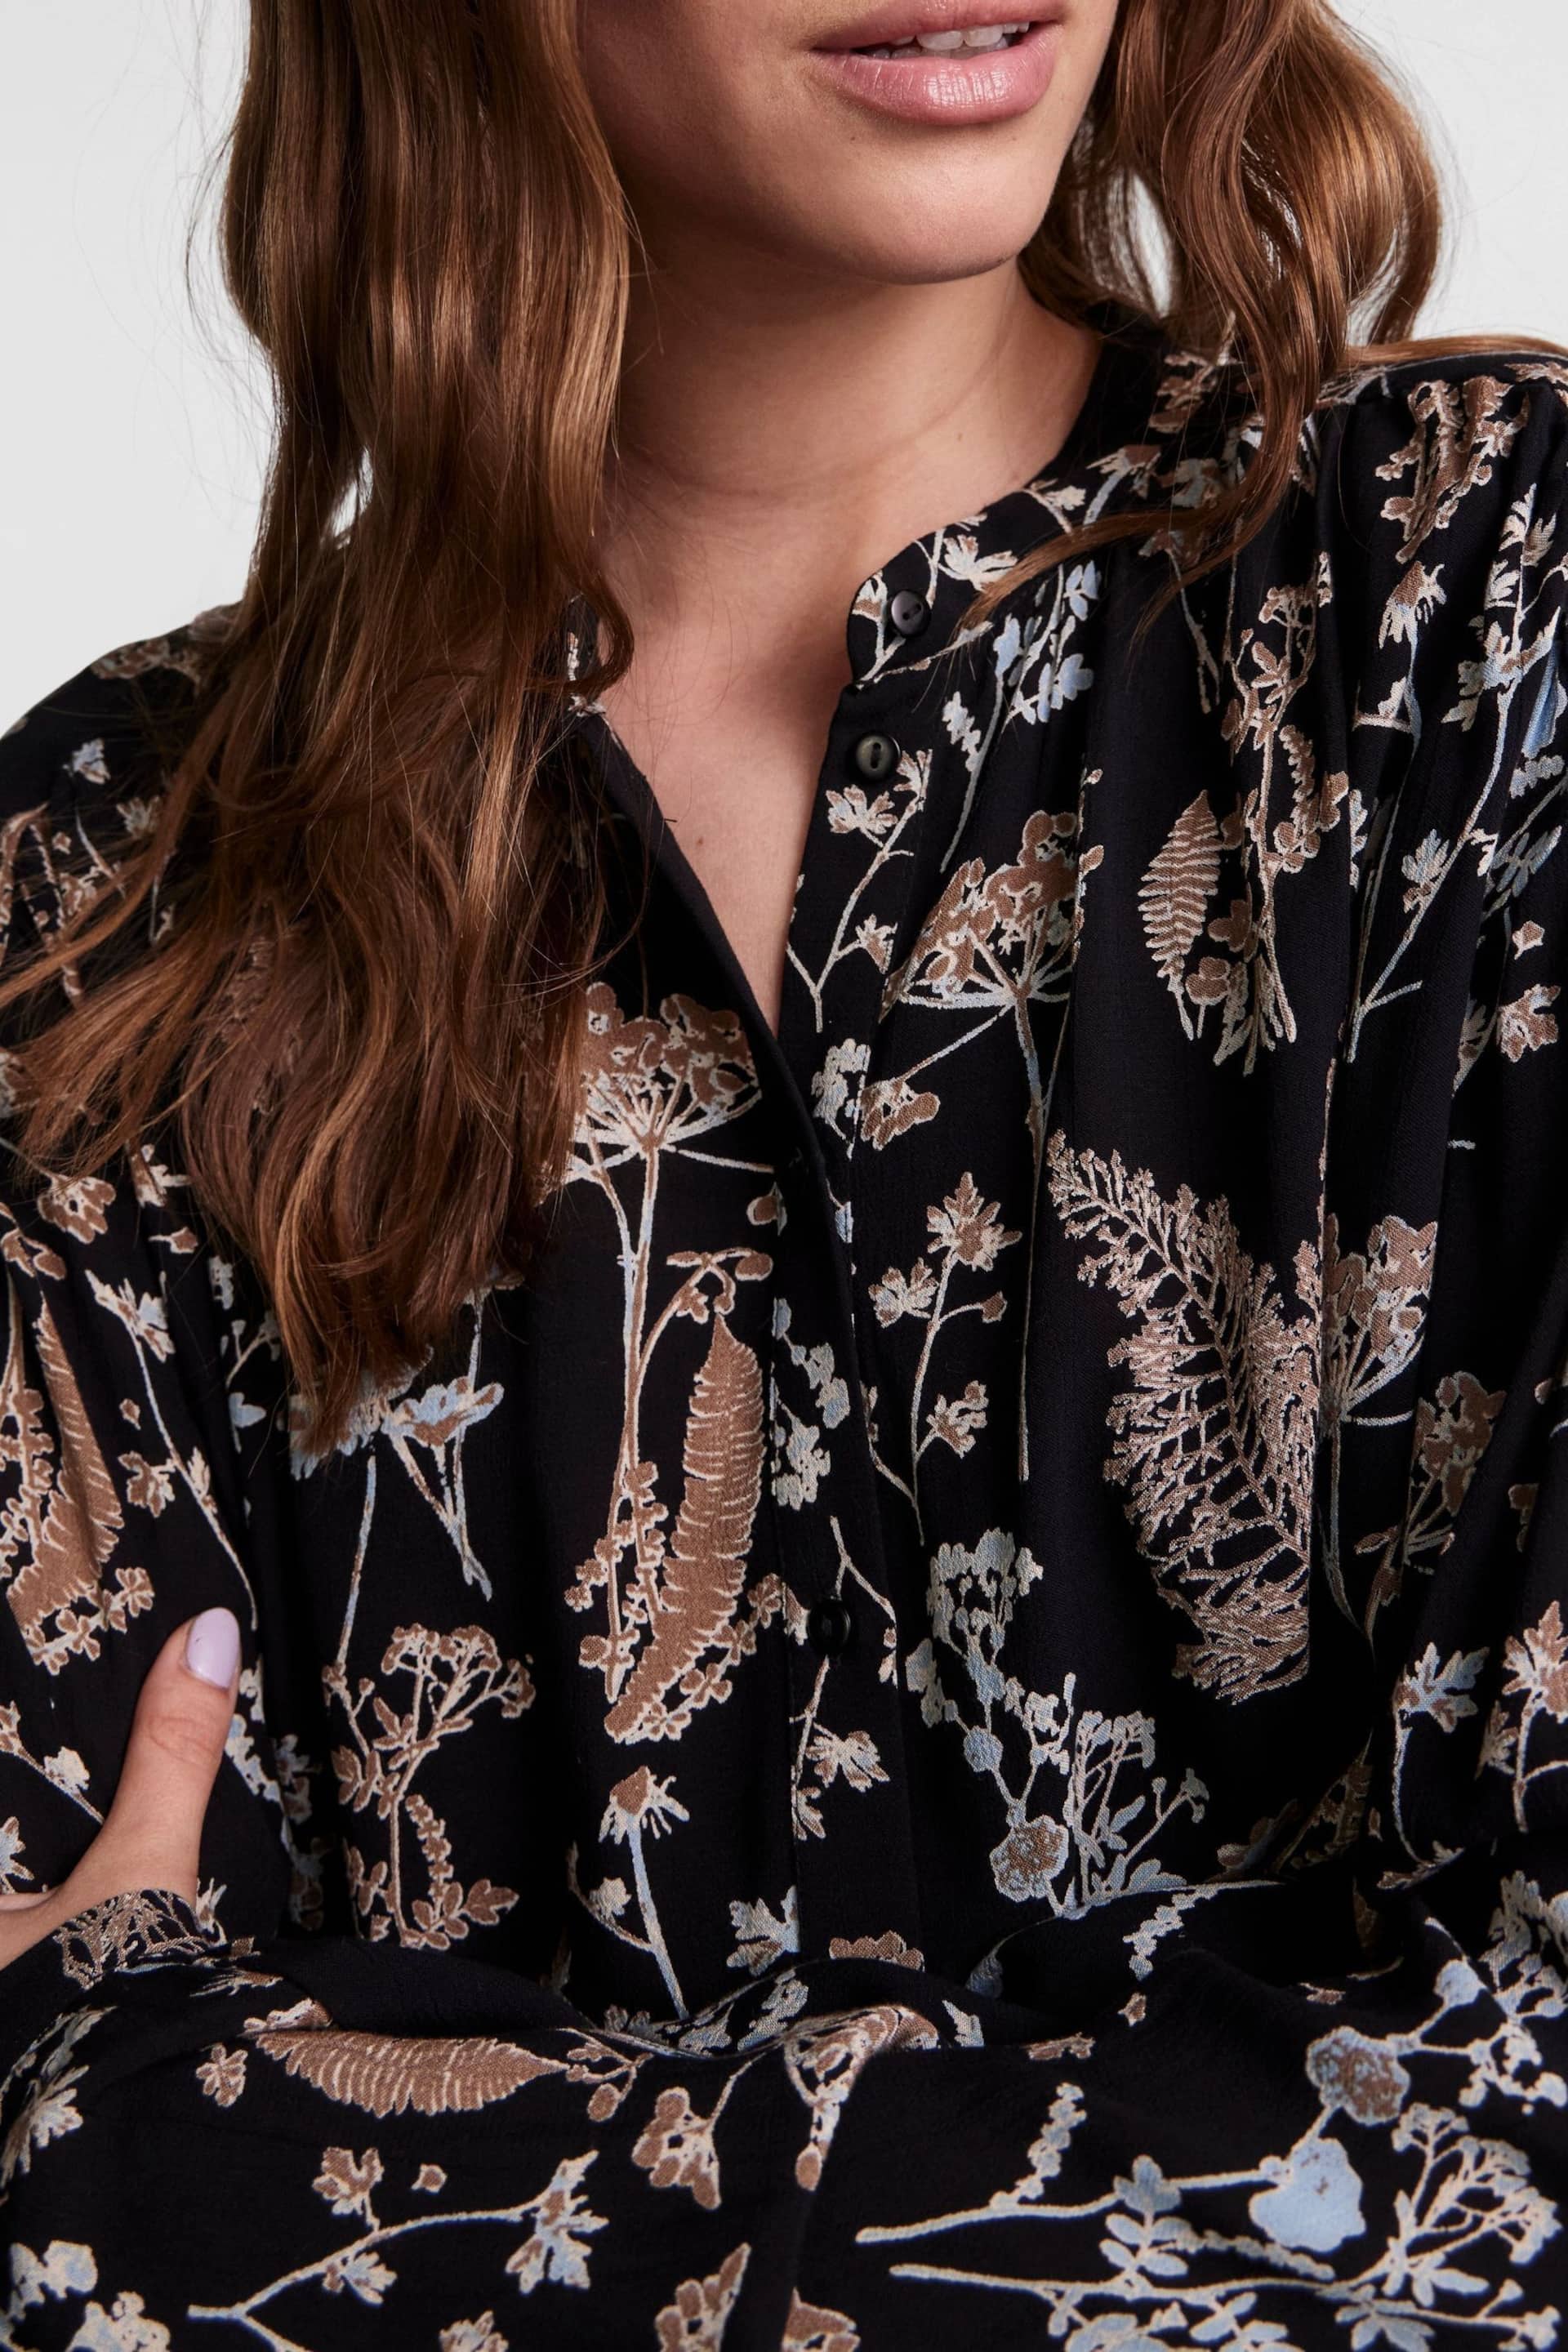 PIECES Black Printed Long Sleeve Blouse - Image 4 of 5